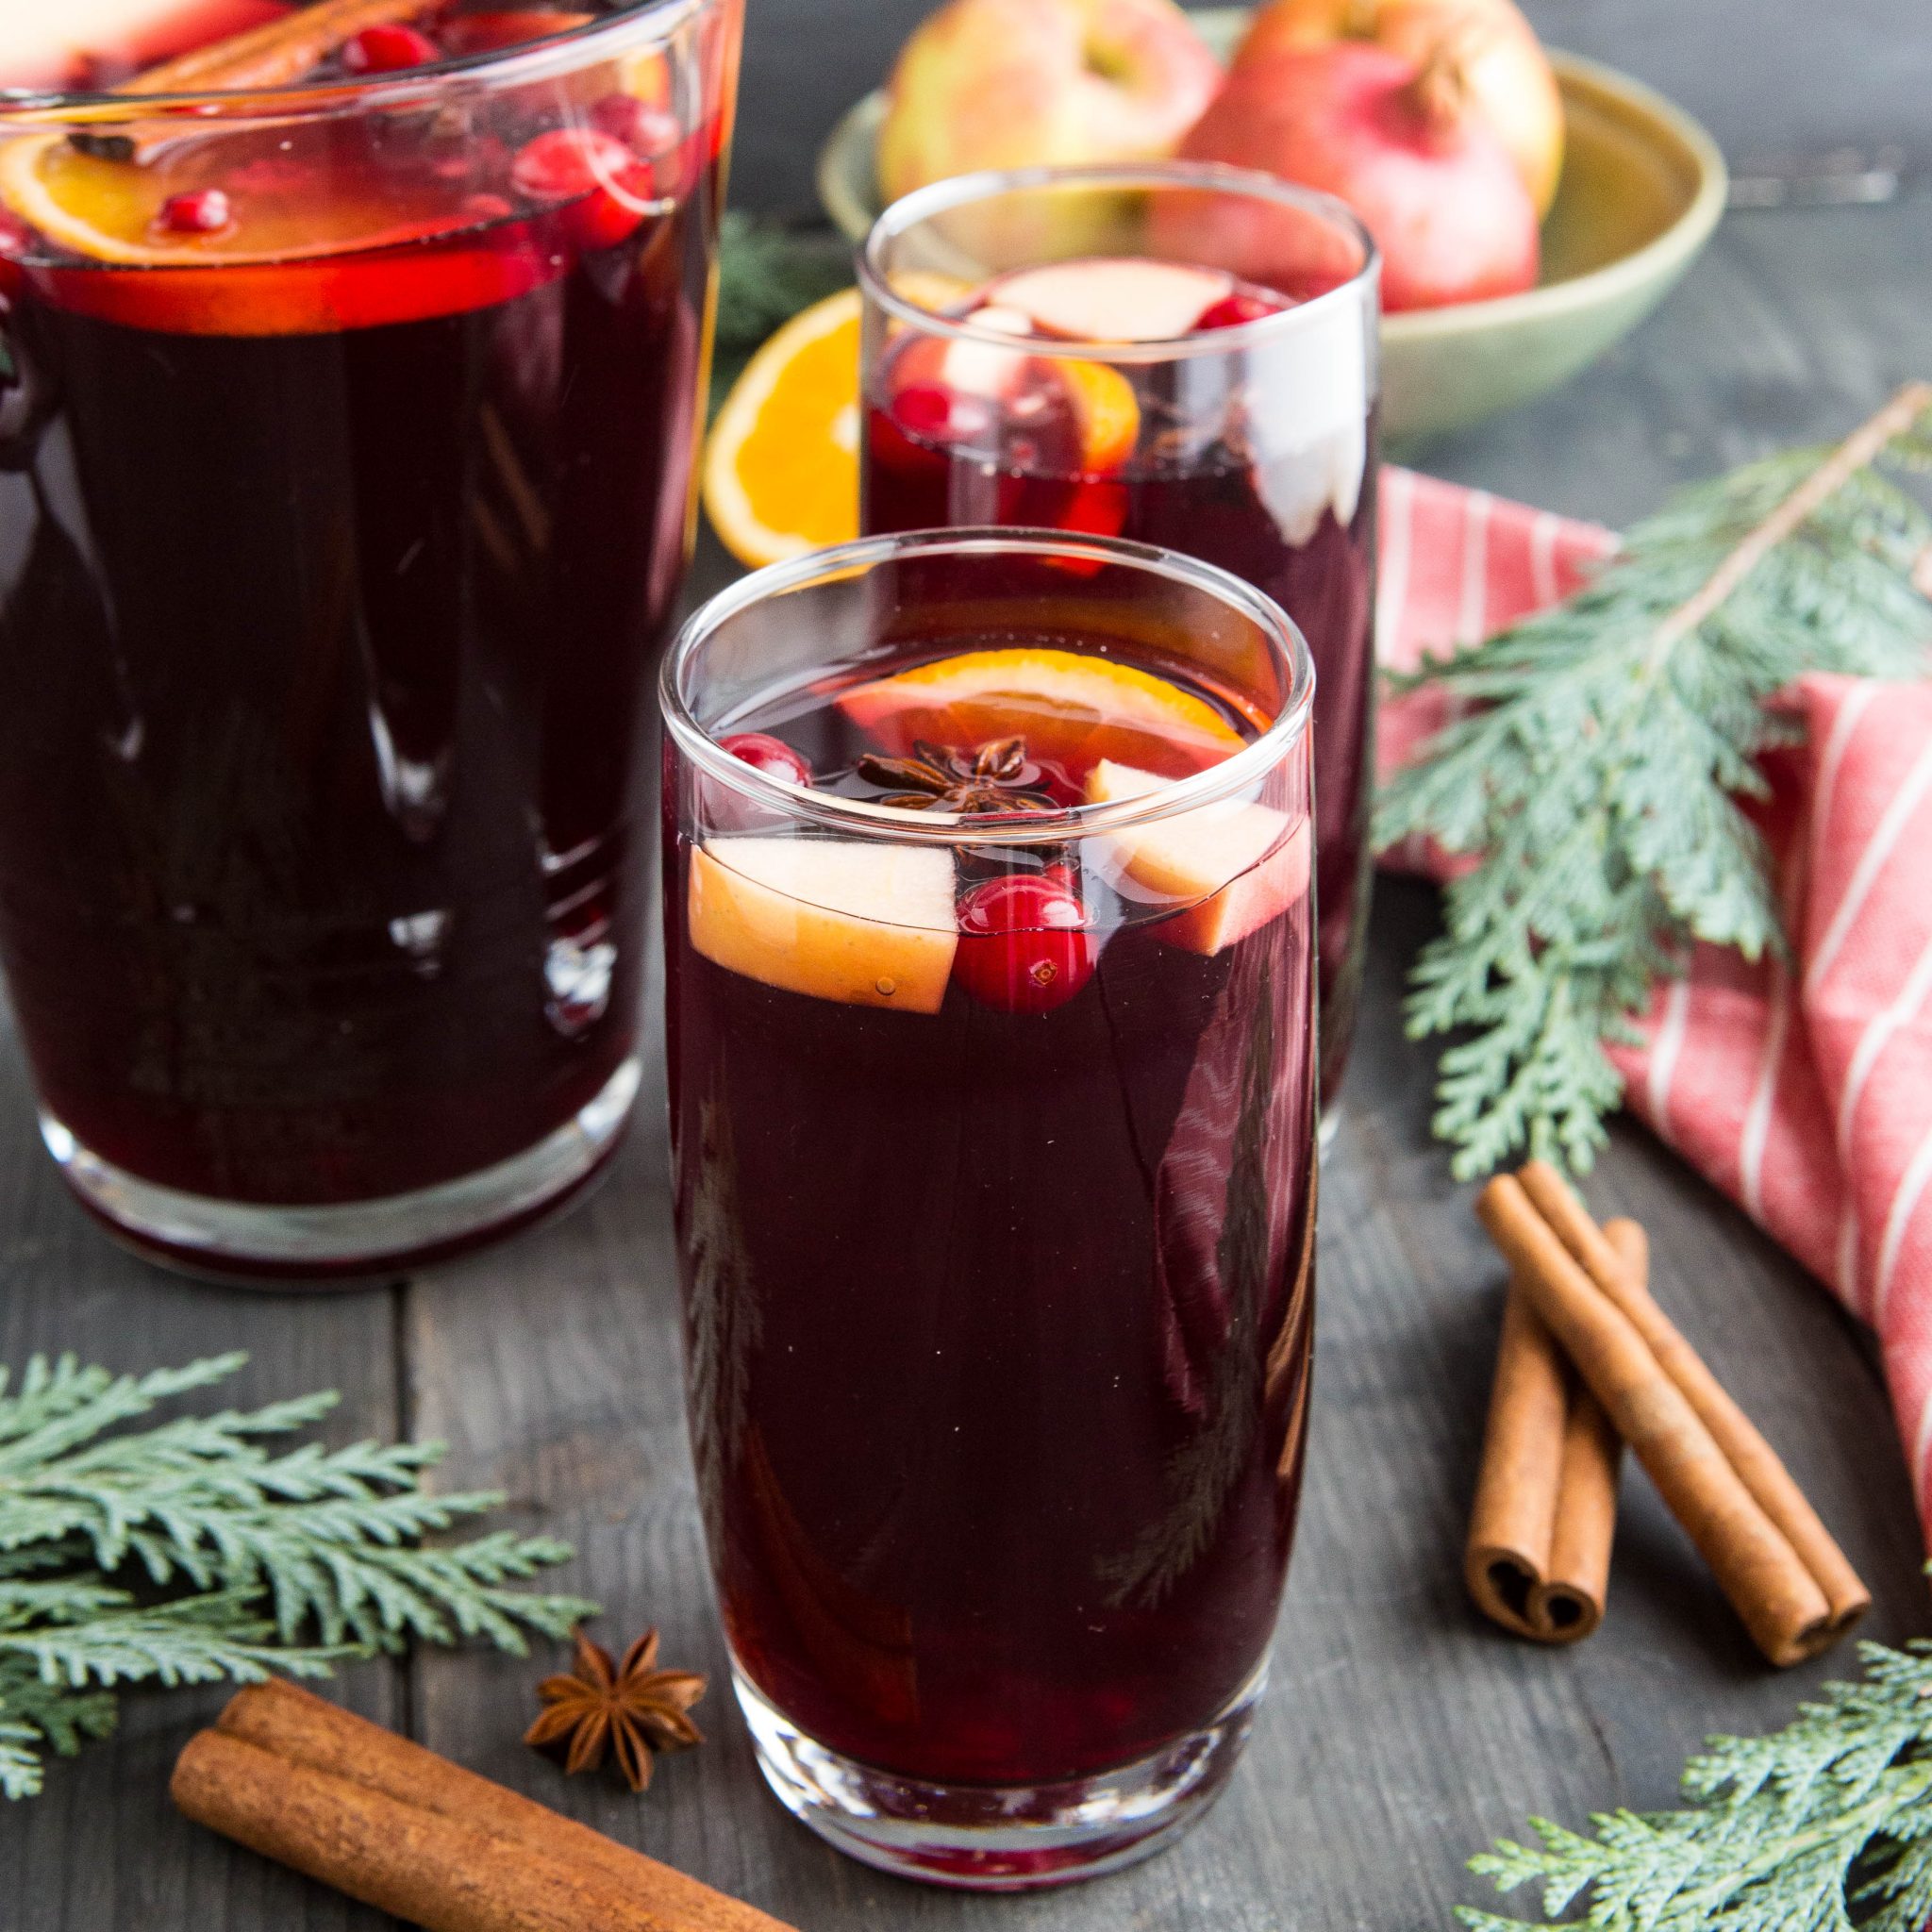 glass and pitcher of apple cranberry sangria